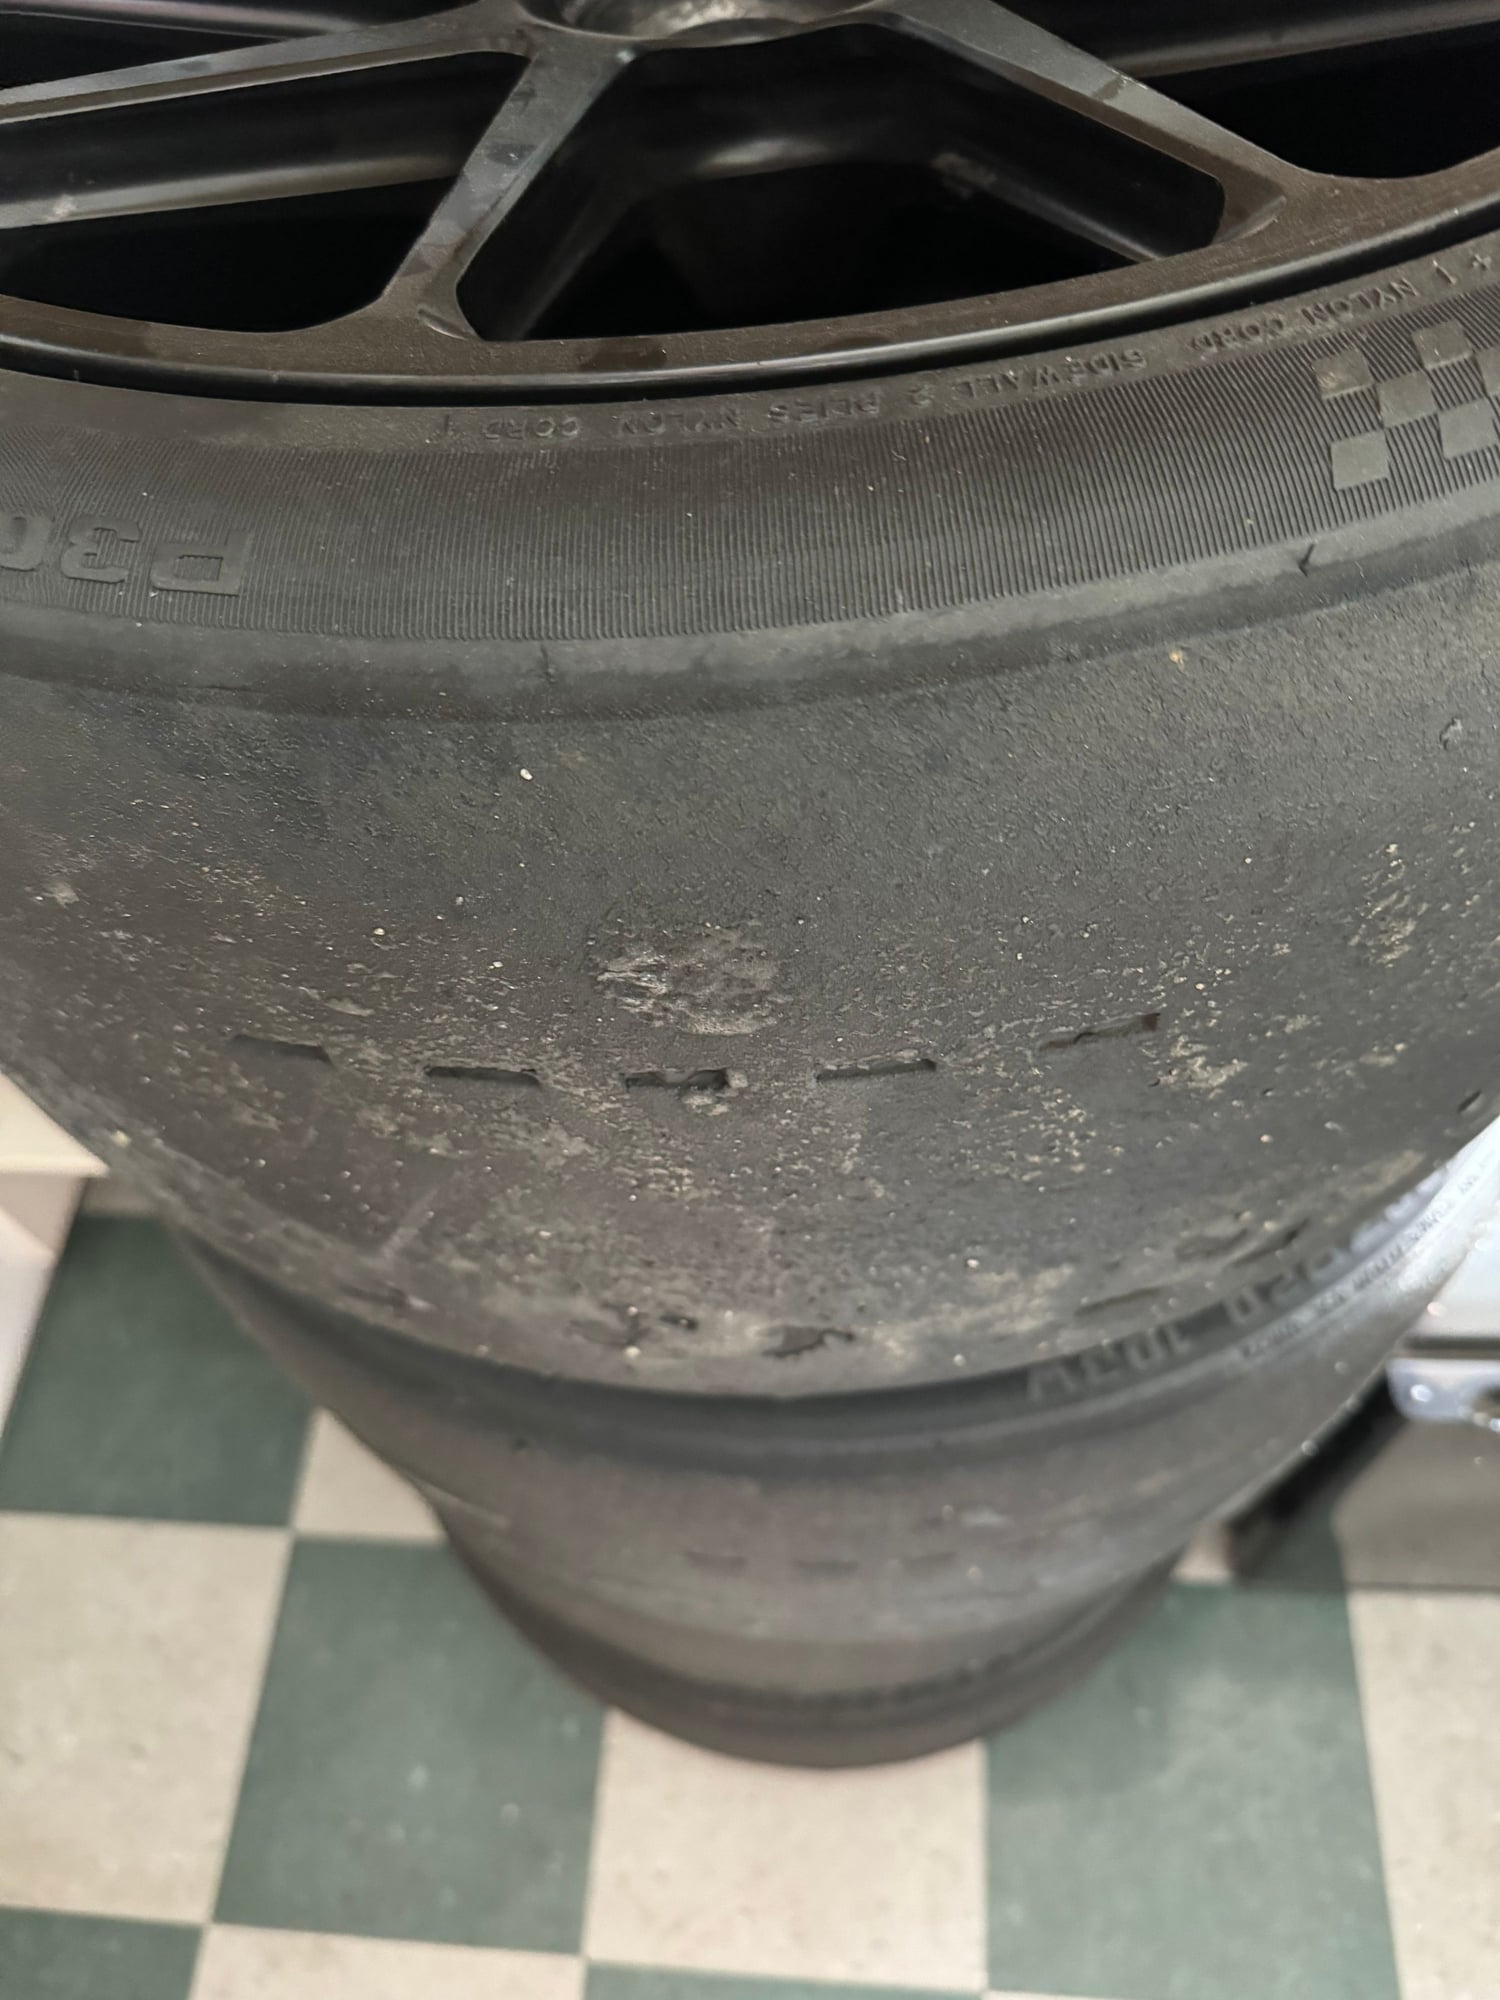 Wheels and Tires/Axles - Forgeline GE1 wheels with Hoosier sicks - Used - Portland, OR 97080, United States